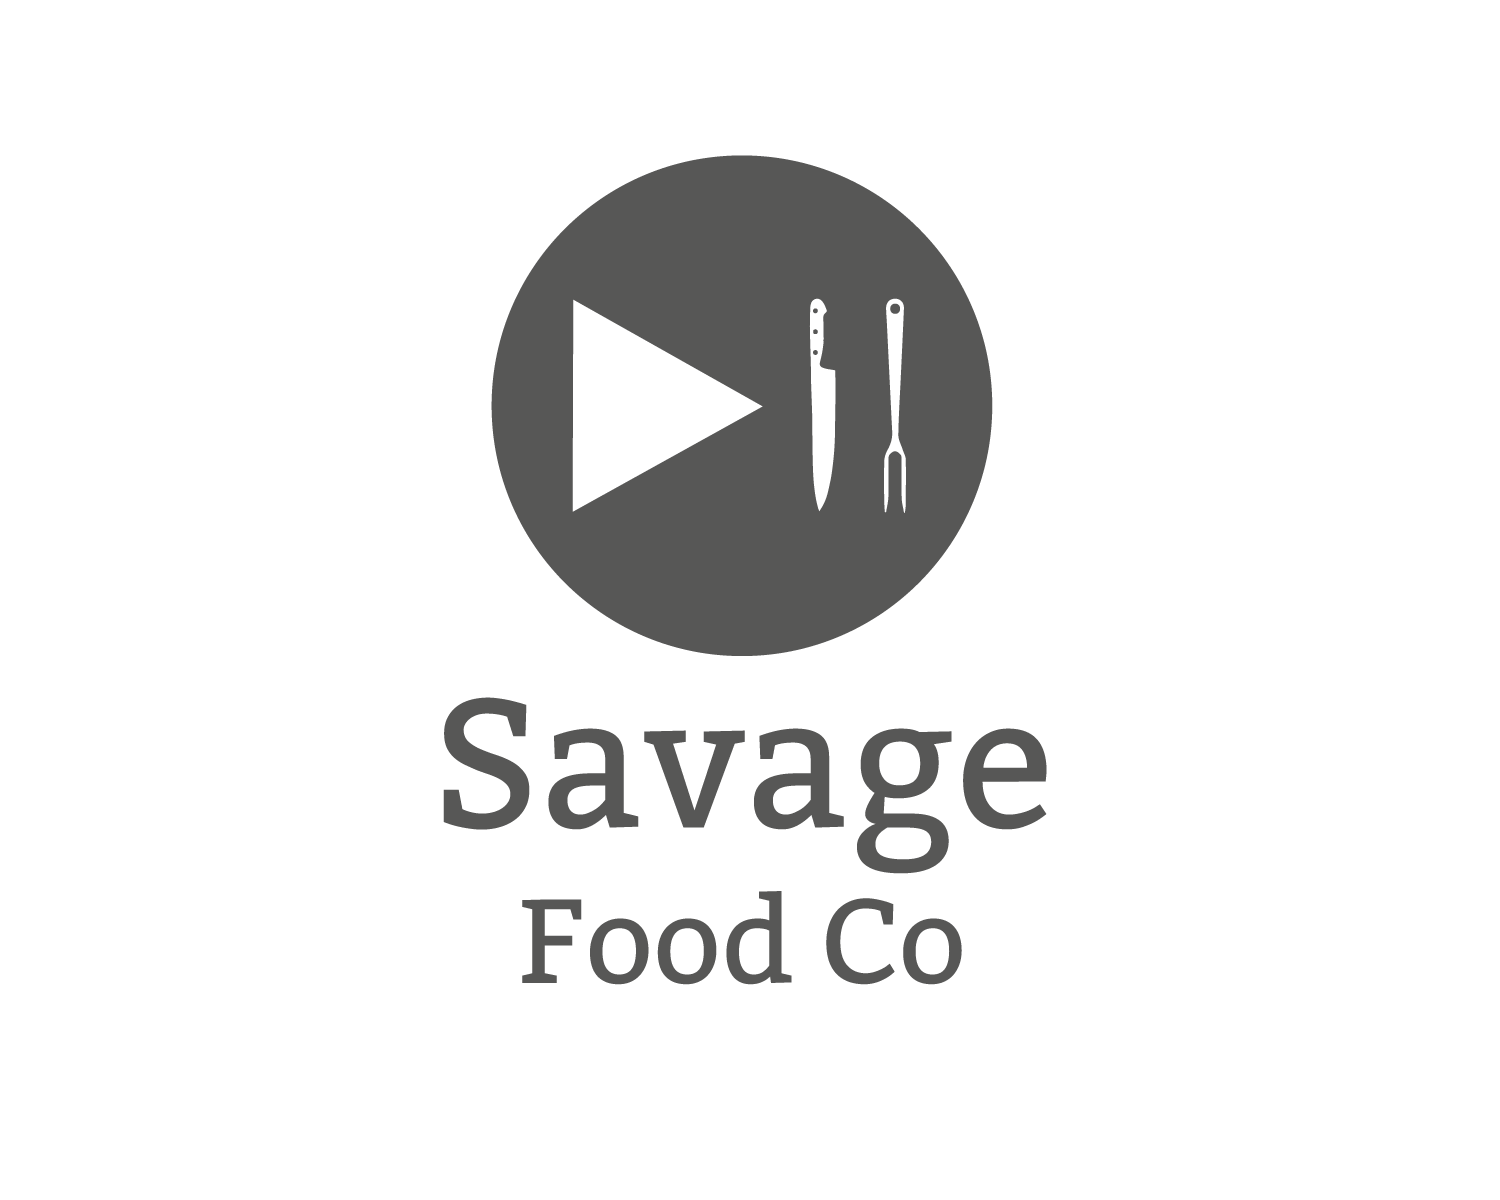 Savage Food Logo - Savage Food Co. A food video agency with in house chef, production